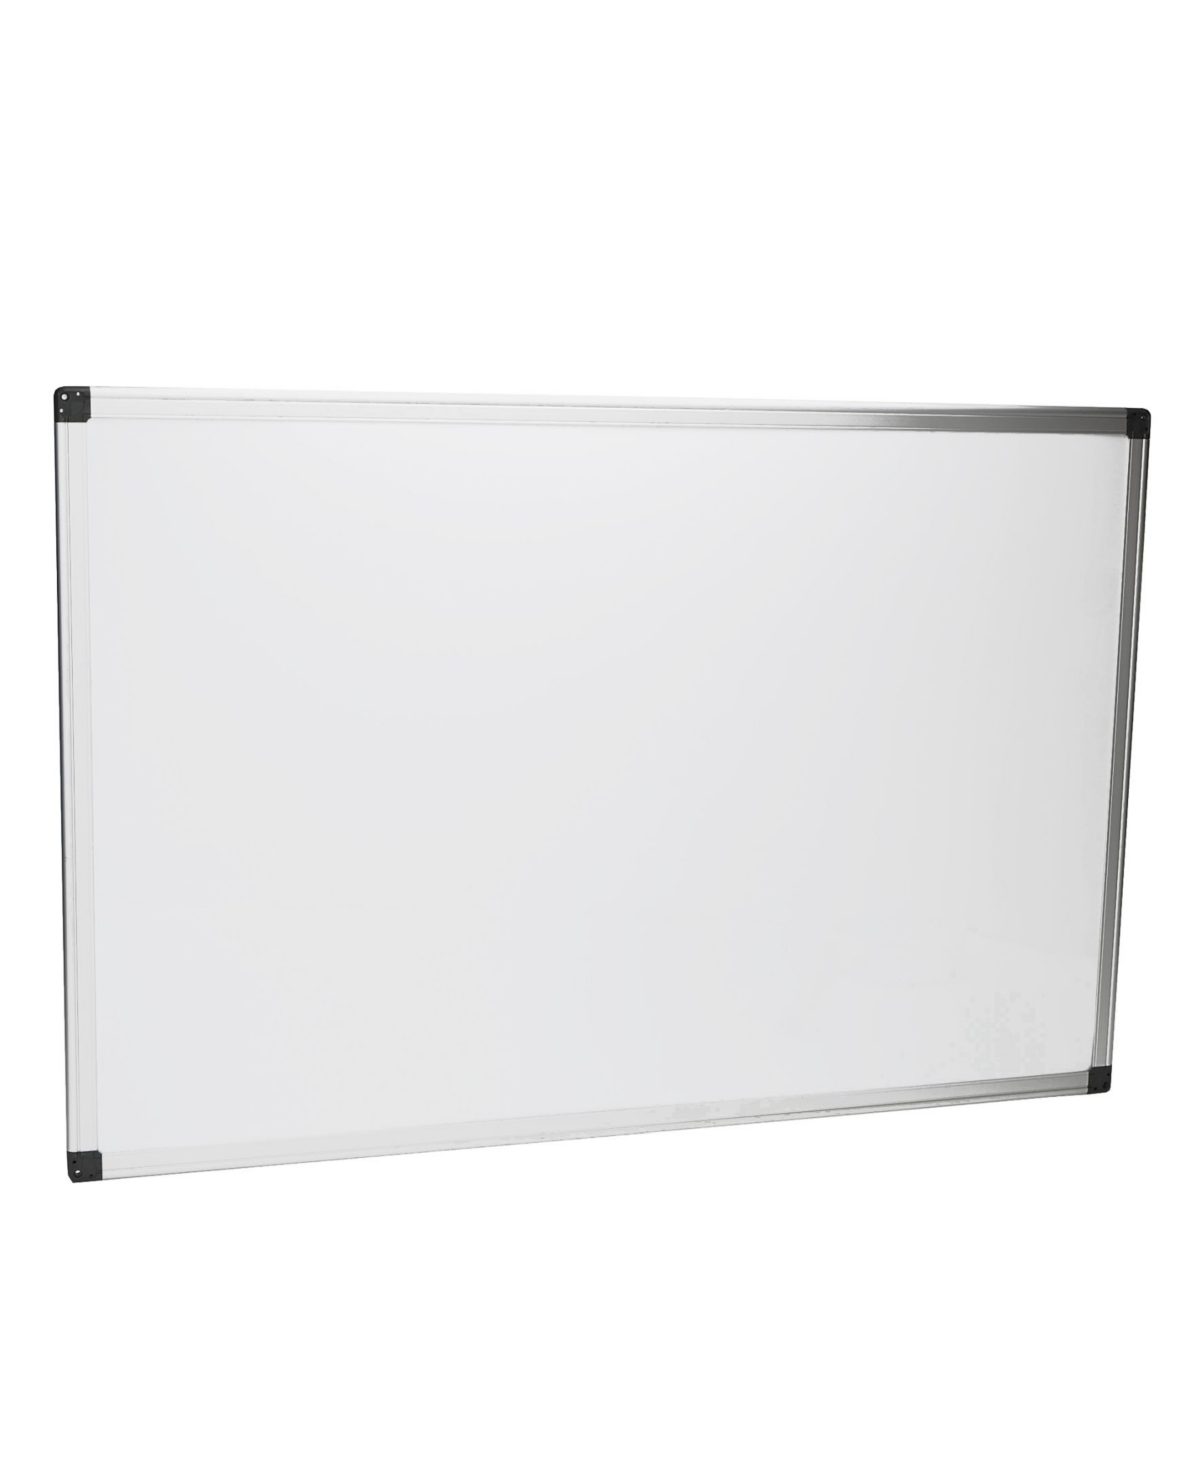 Dry Erase Wall Mount Magnetic Board with Marker Tray, 24" x 36" - White